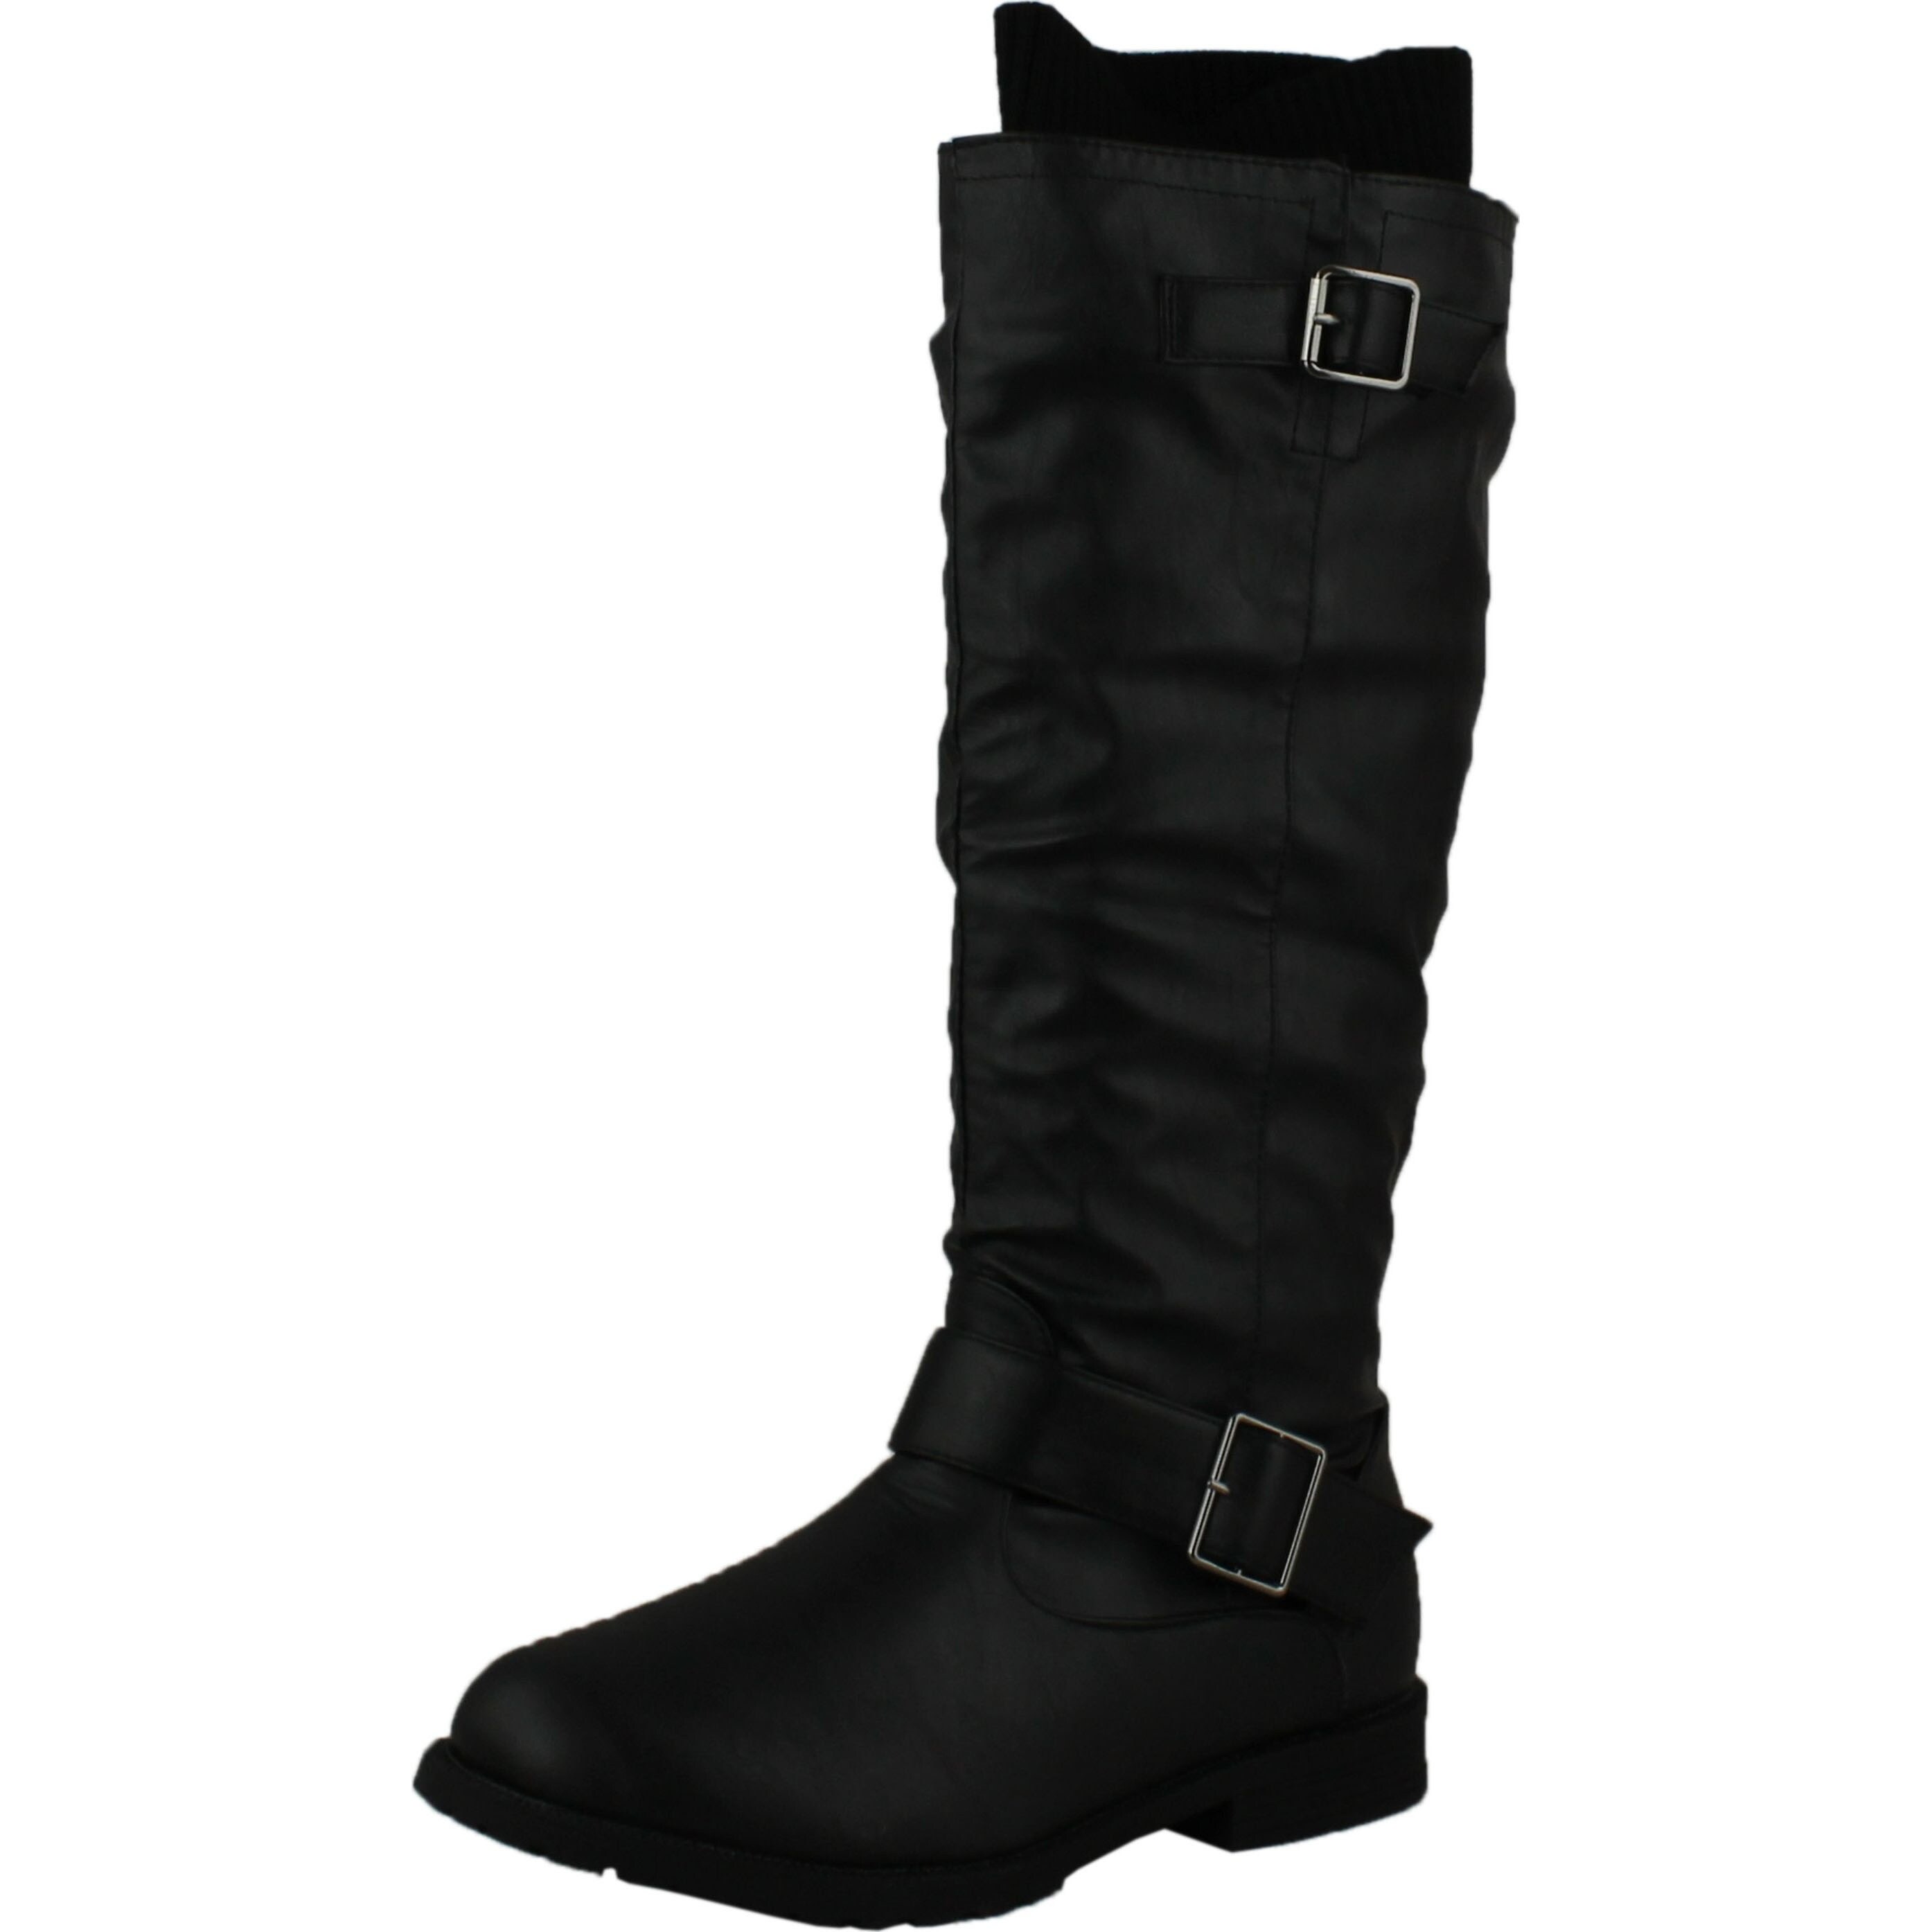 womens harley riding boots